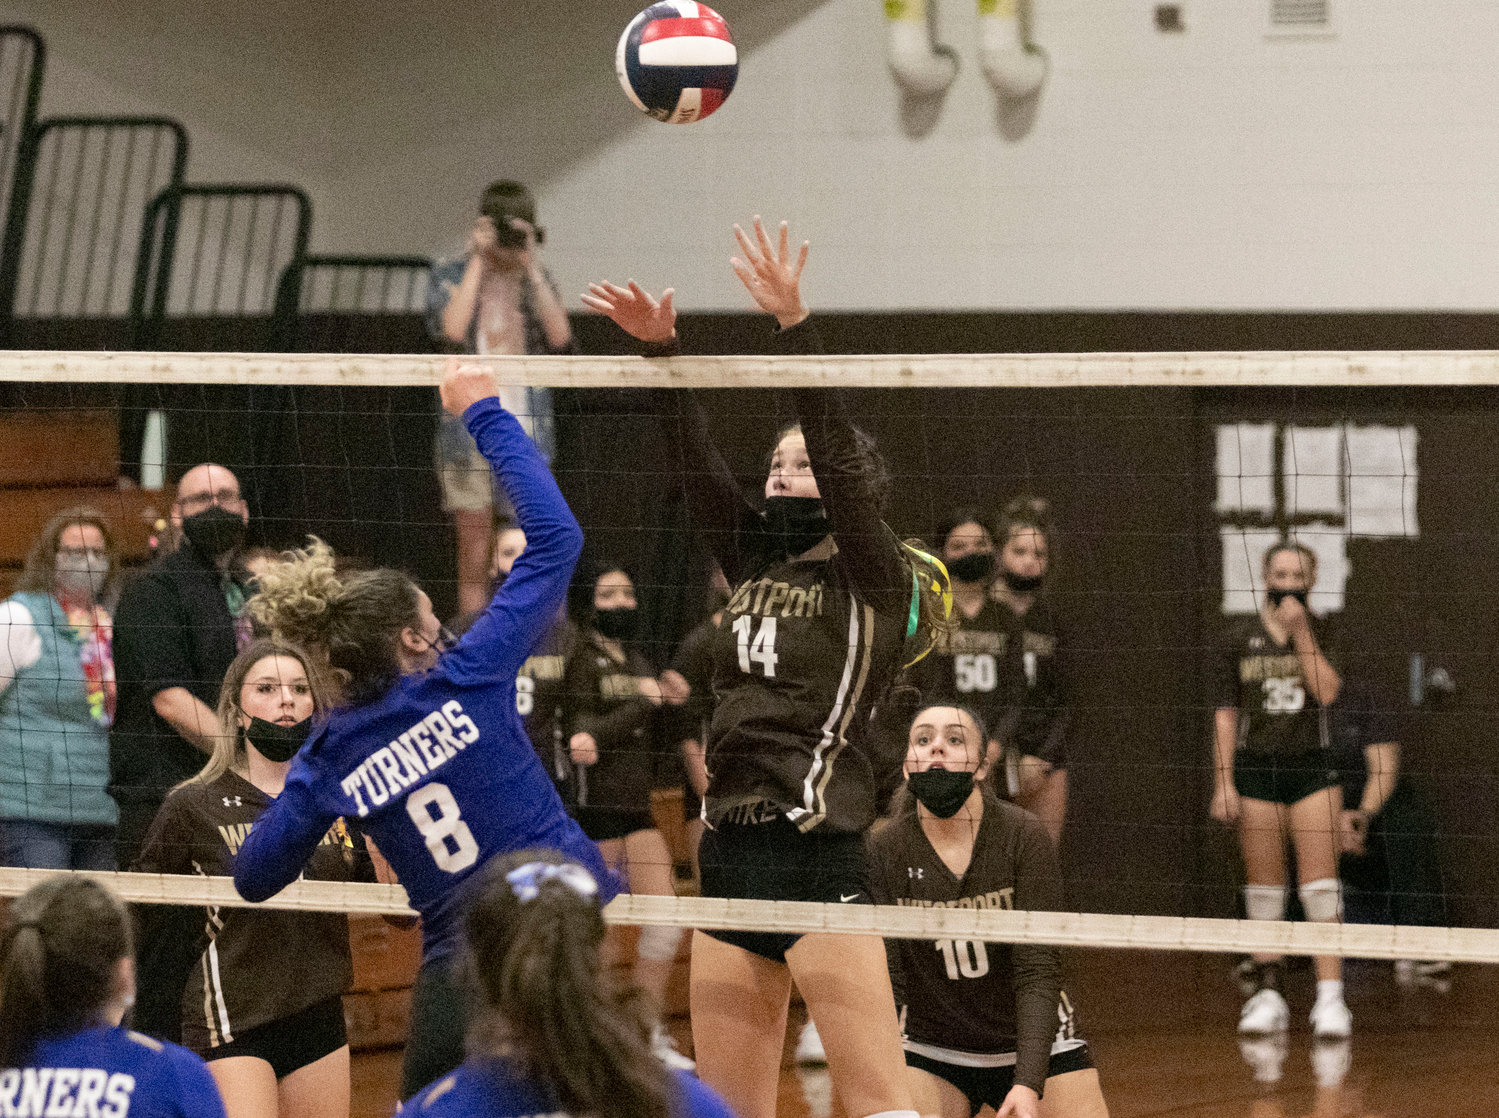 Madison Benson attempts a block with Abby Gaudreau (right).